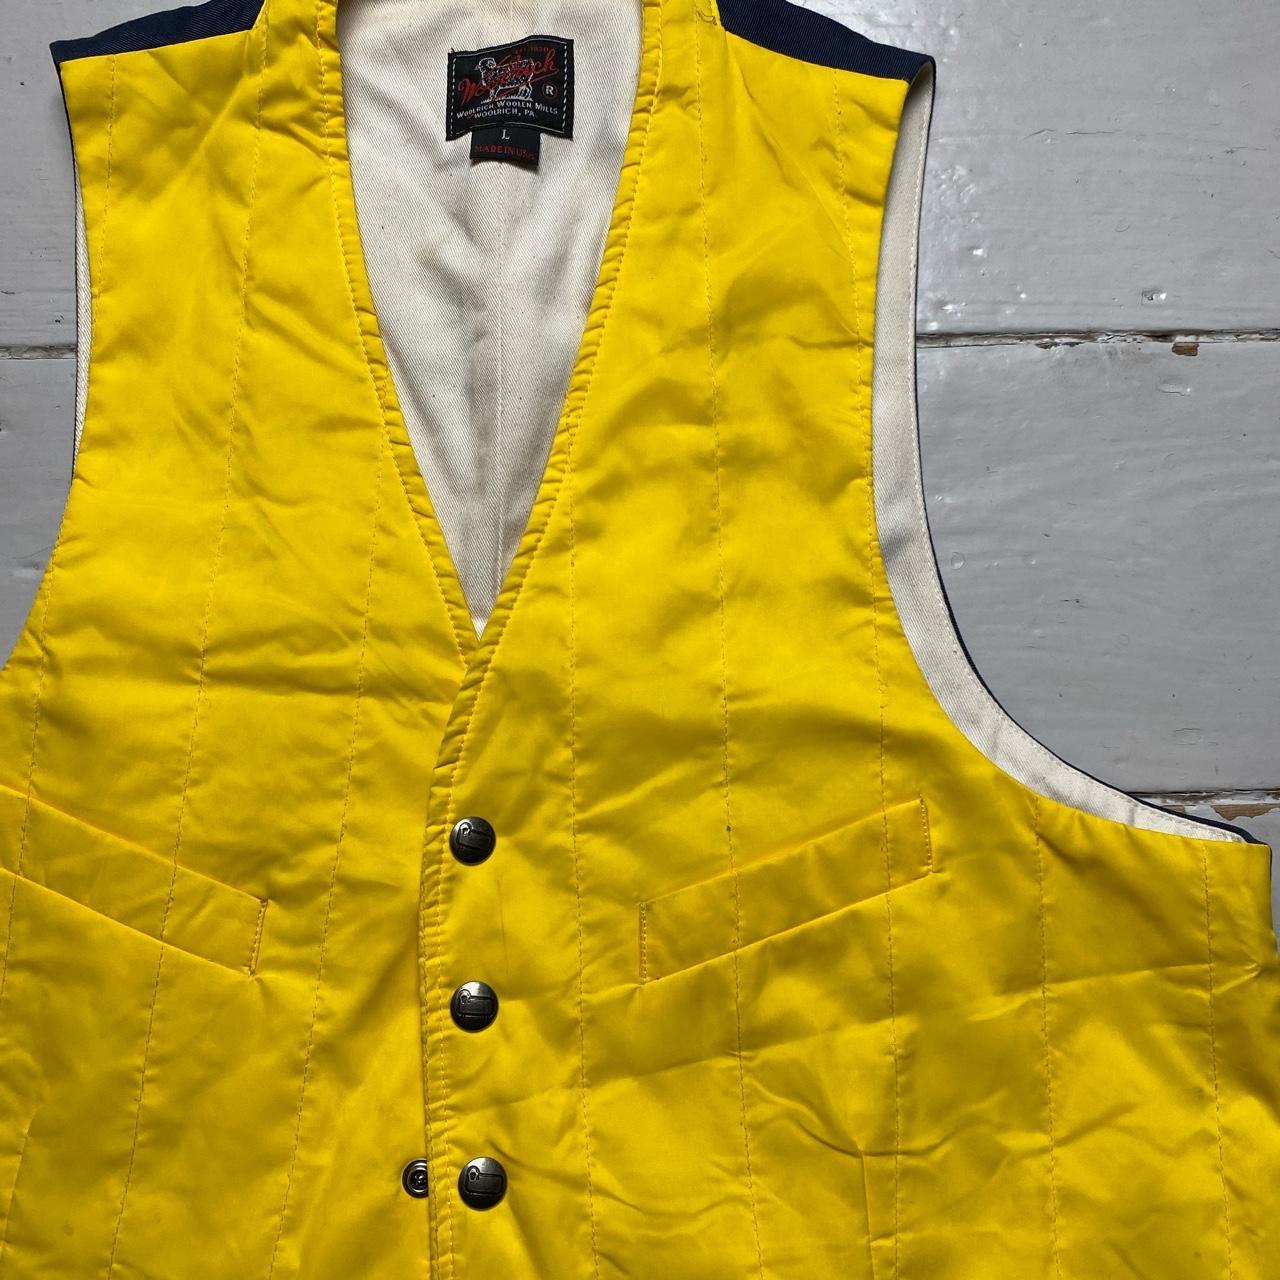 Woolrich Yellow and Navy Gilet Waistcoat